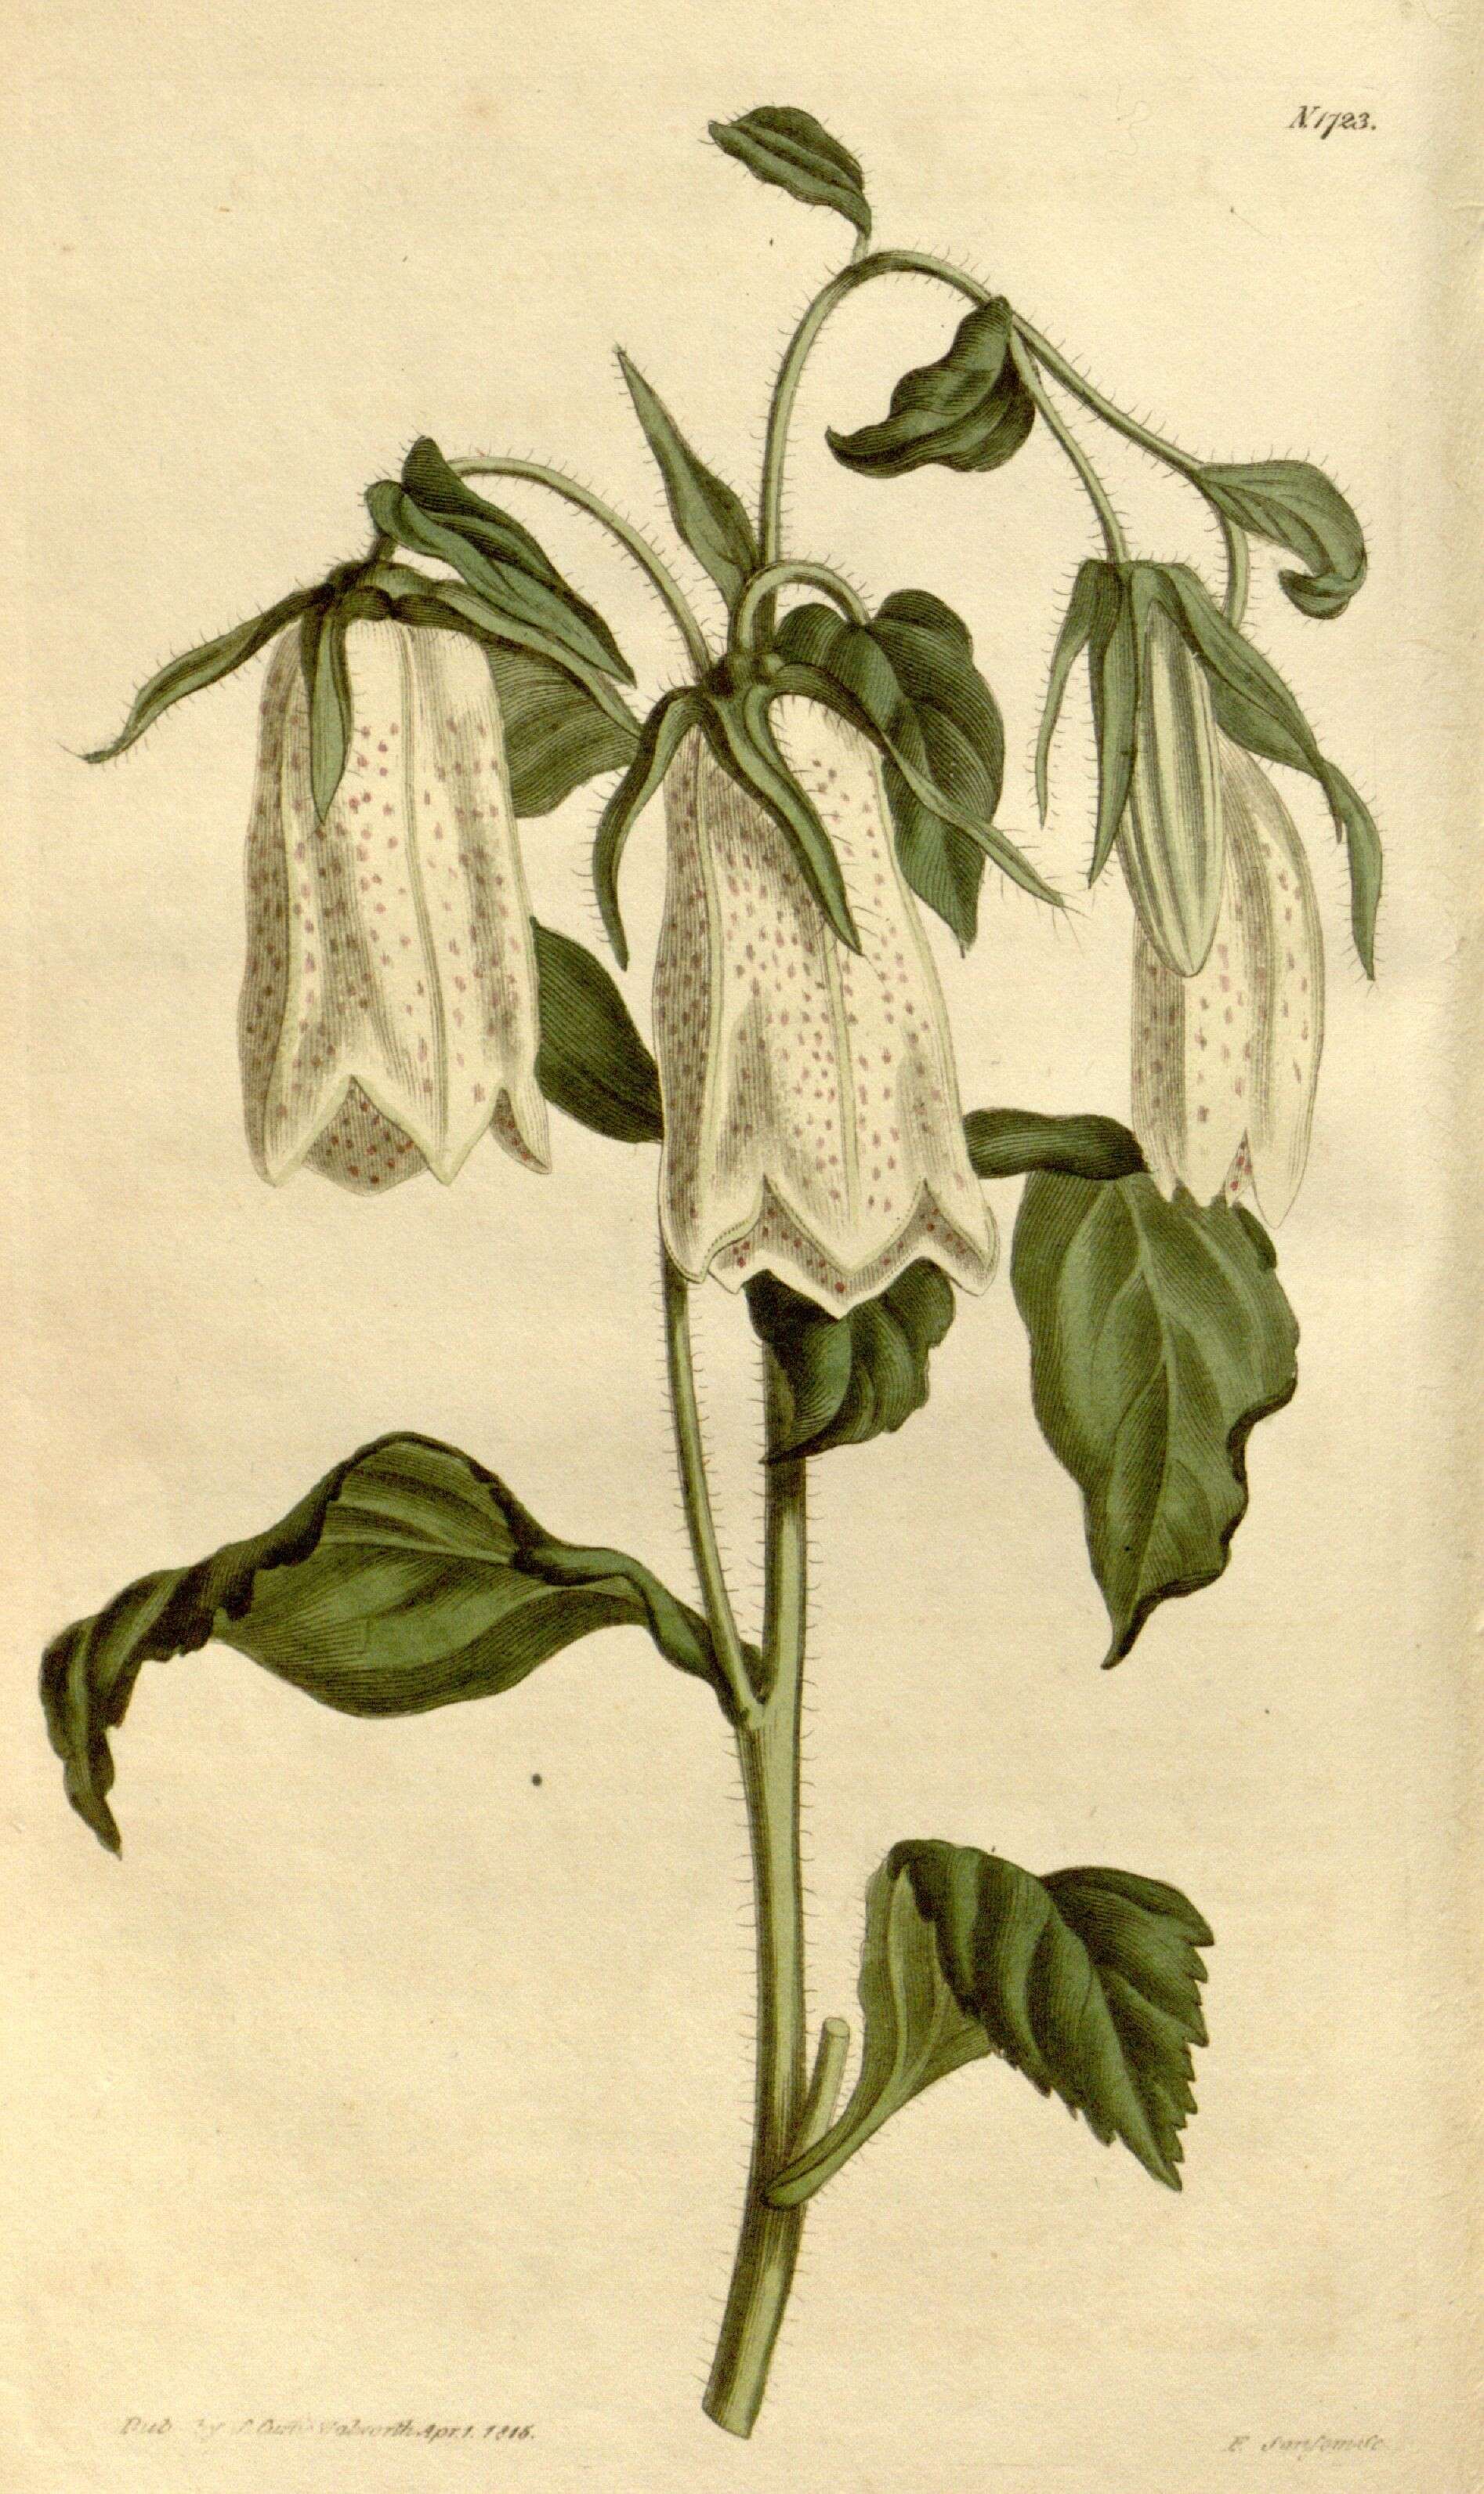 Image of spotted bellflower